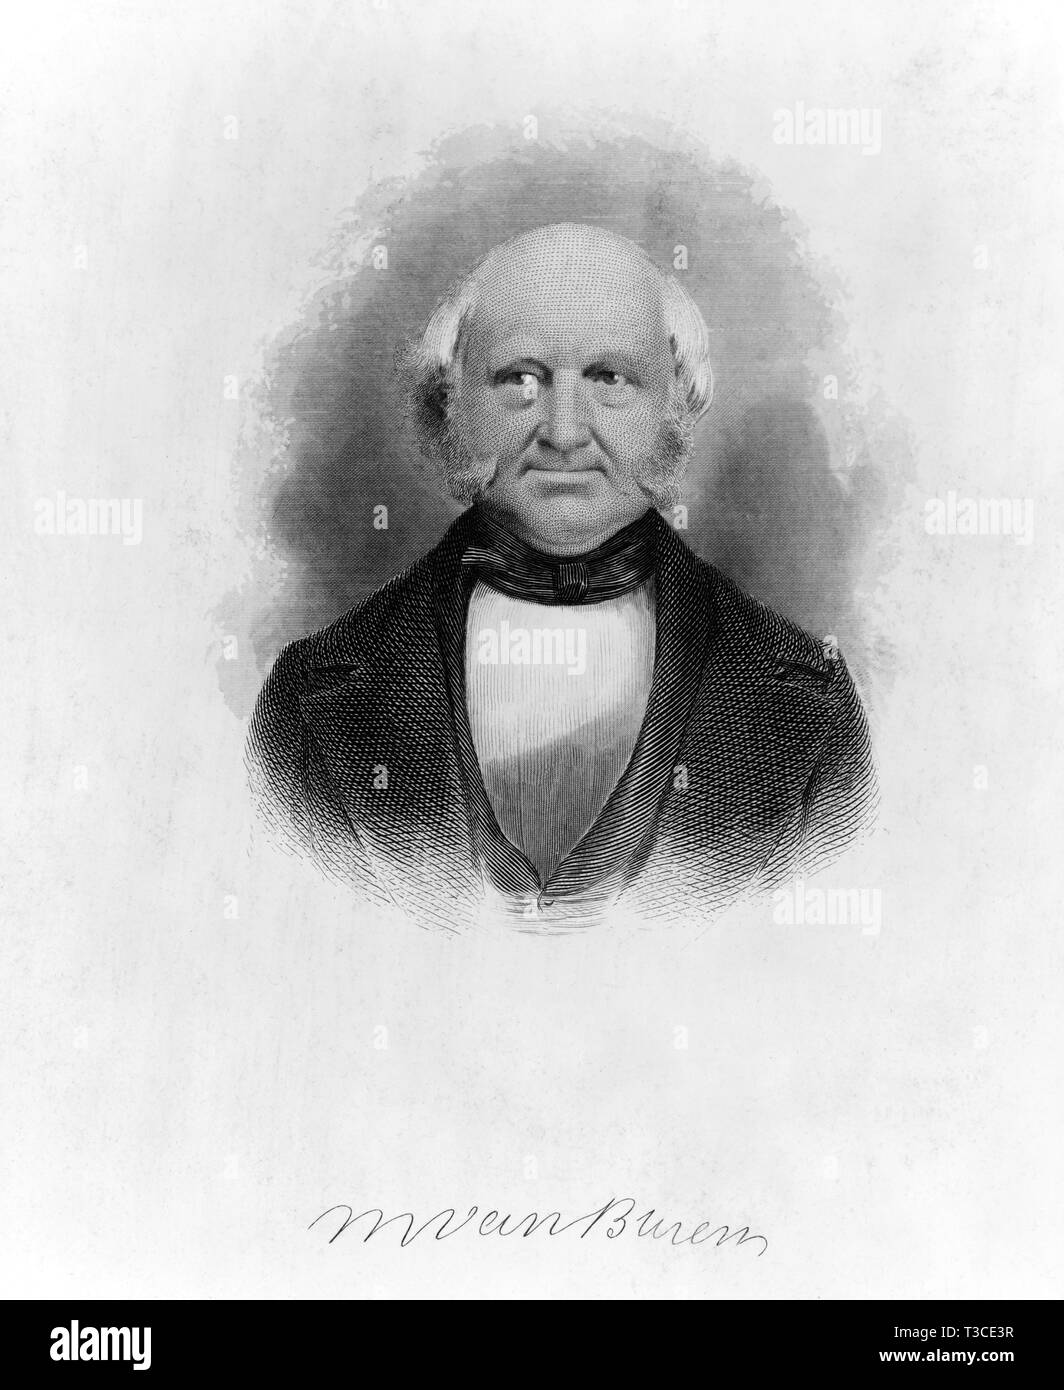 Martin Van Buren (1782-1862), 8th President of the United States,  1837-1841, Head and Shoulders Portrait, Engraving by V. Balch from a  Daguerreotype Stock Photo - Alamy